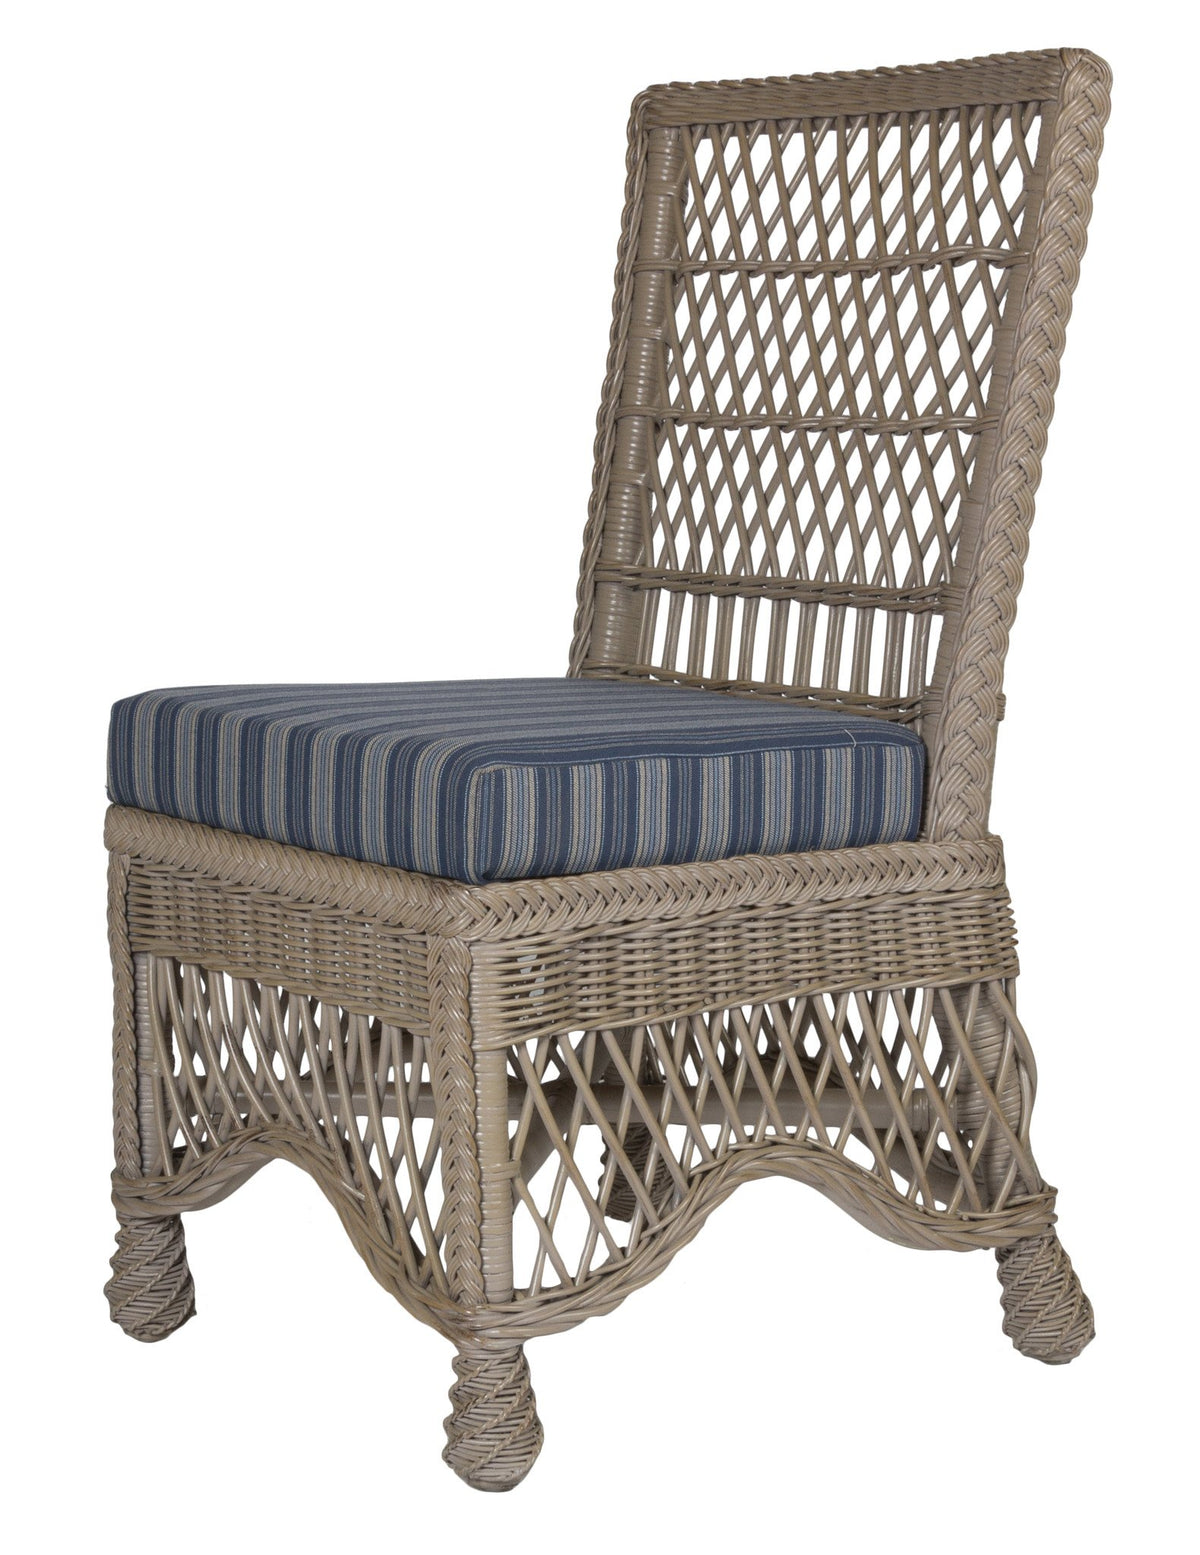 Designer Wicker &amp; Rattan By Tribor Naples Dining Side Chair Dining Chair - Rattan Imports